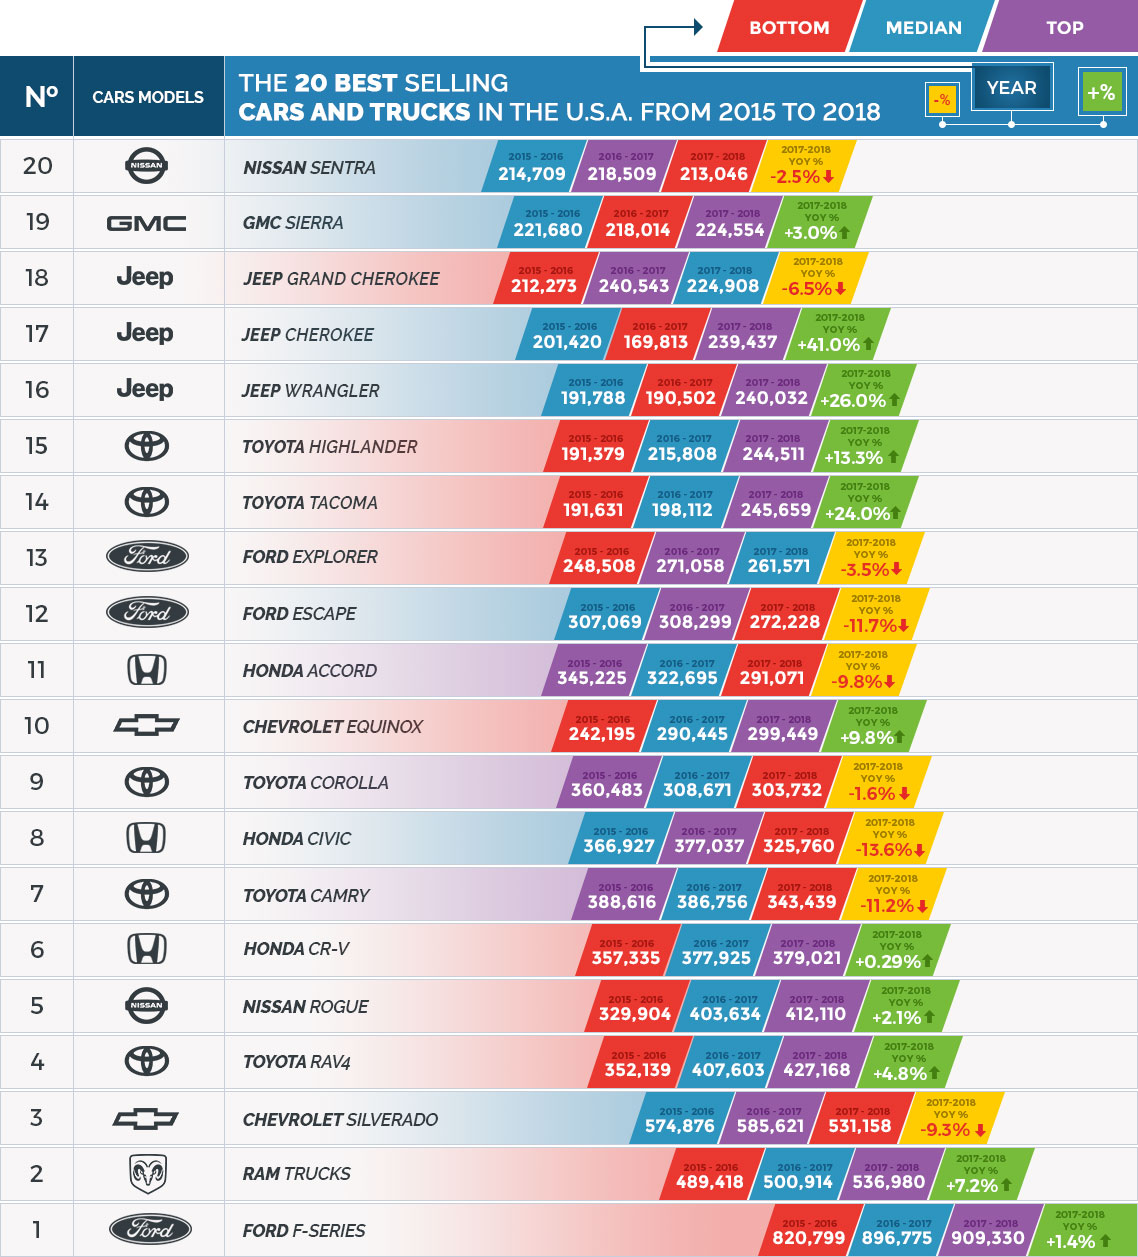 The-20-Best-Selling-Cars-and-Trucks-in-the-U.S.A.-Year-over-Year-Comparisons.jpg